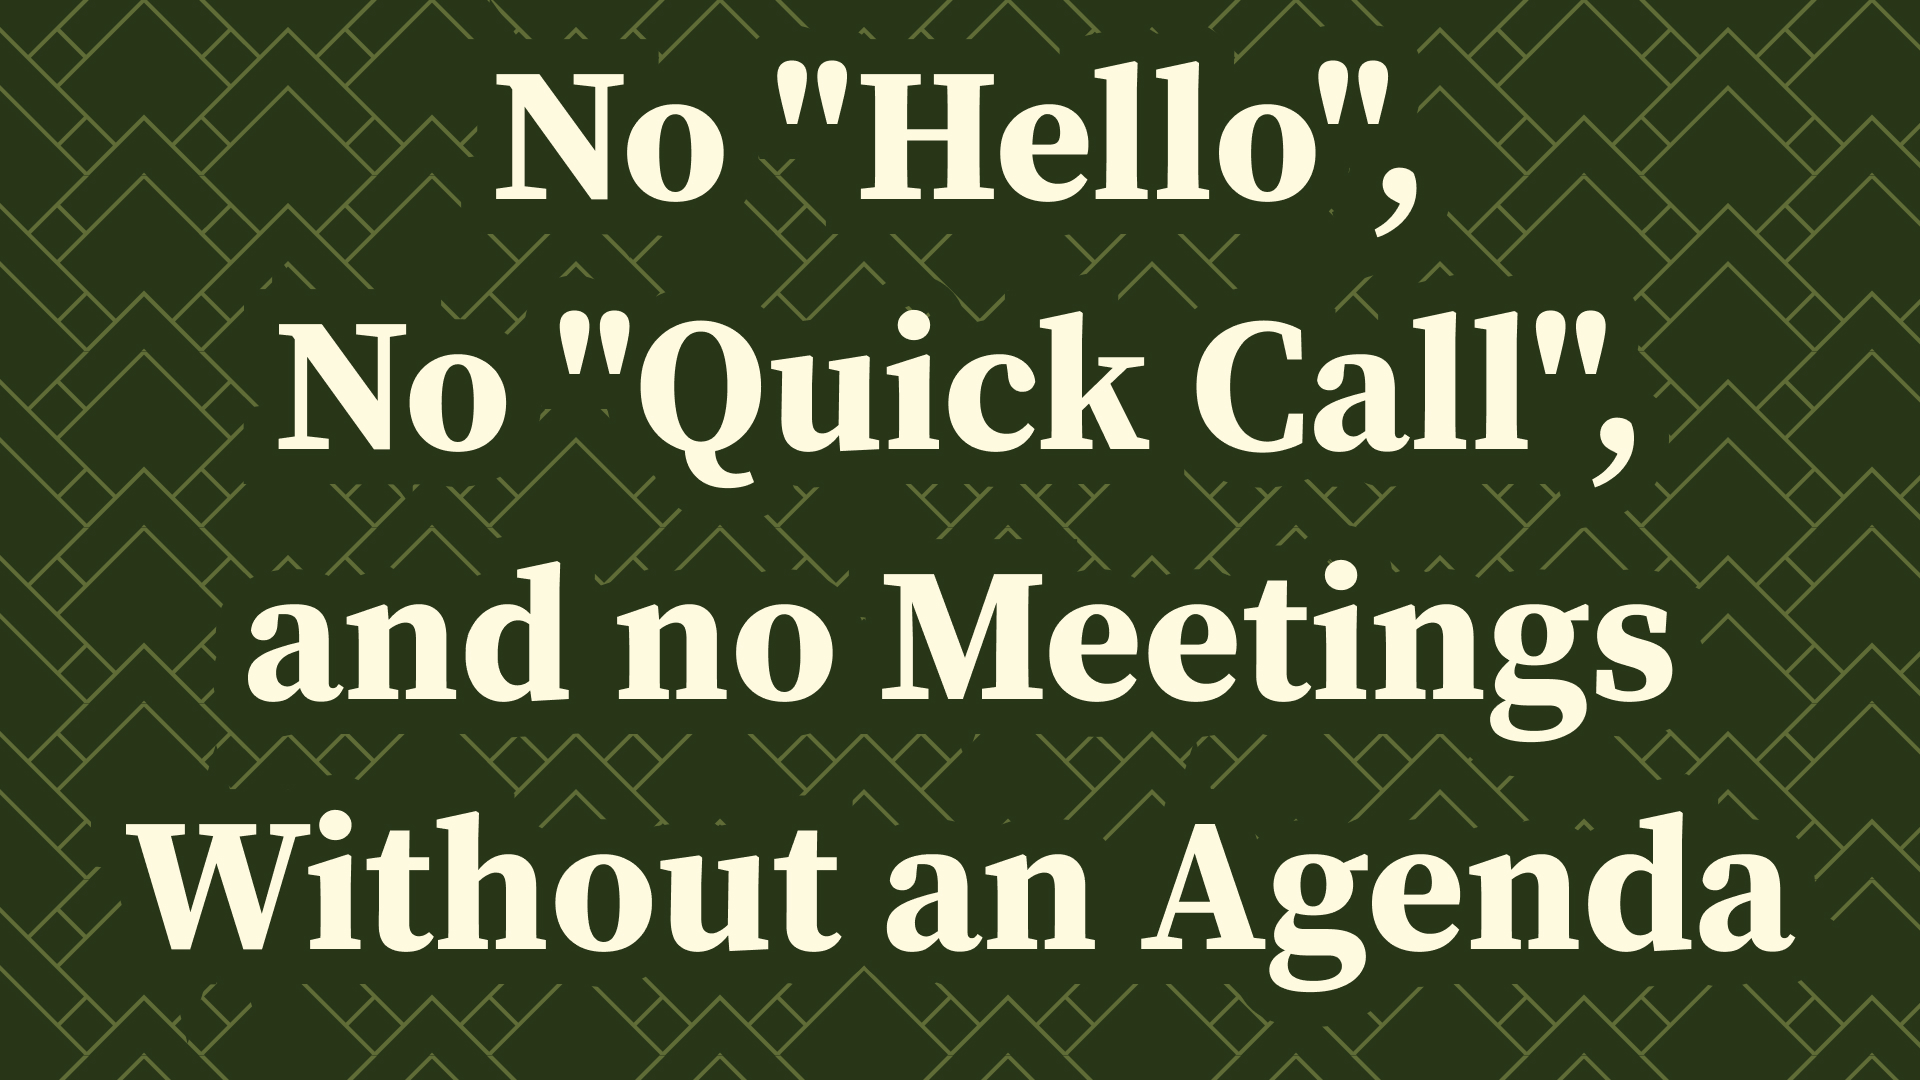 No "Hello", No "Quick Call", and no Meetings Without an Agenda